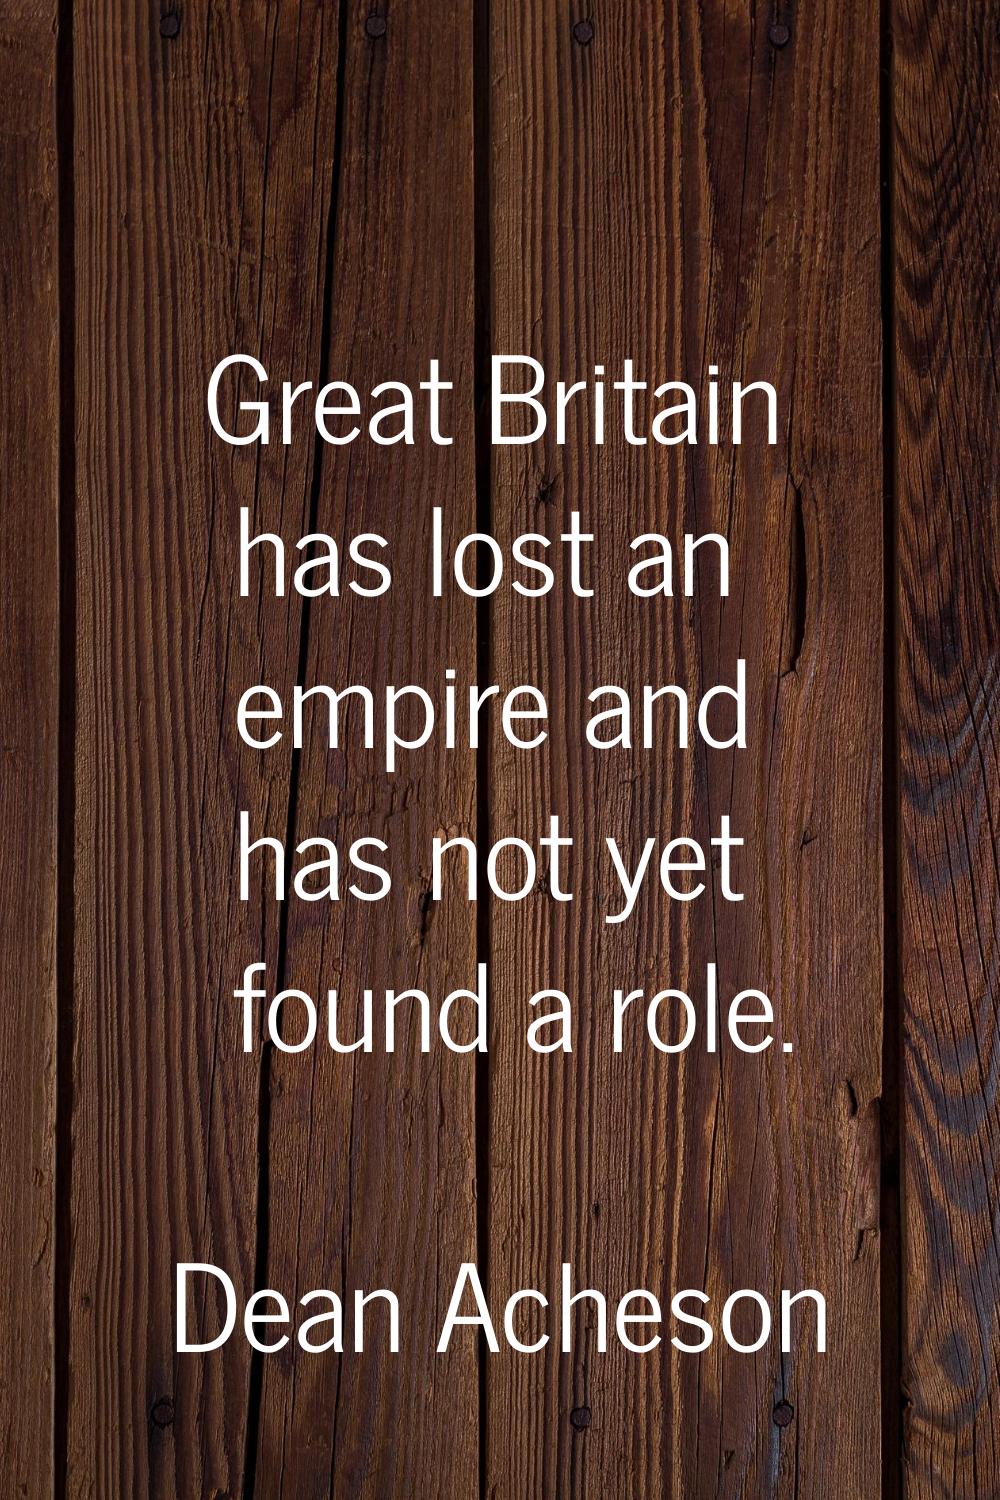 Great Britain has lost an empire and has not yet found a role.